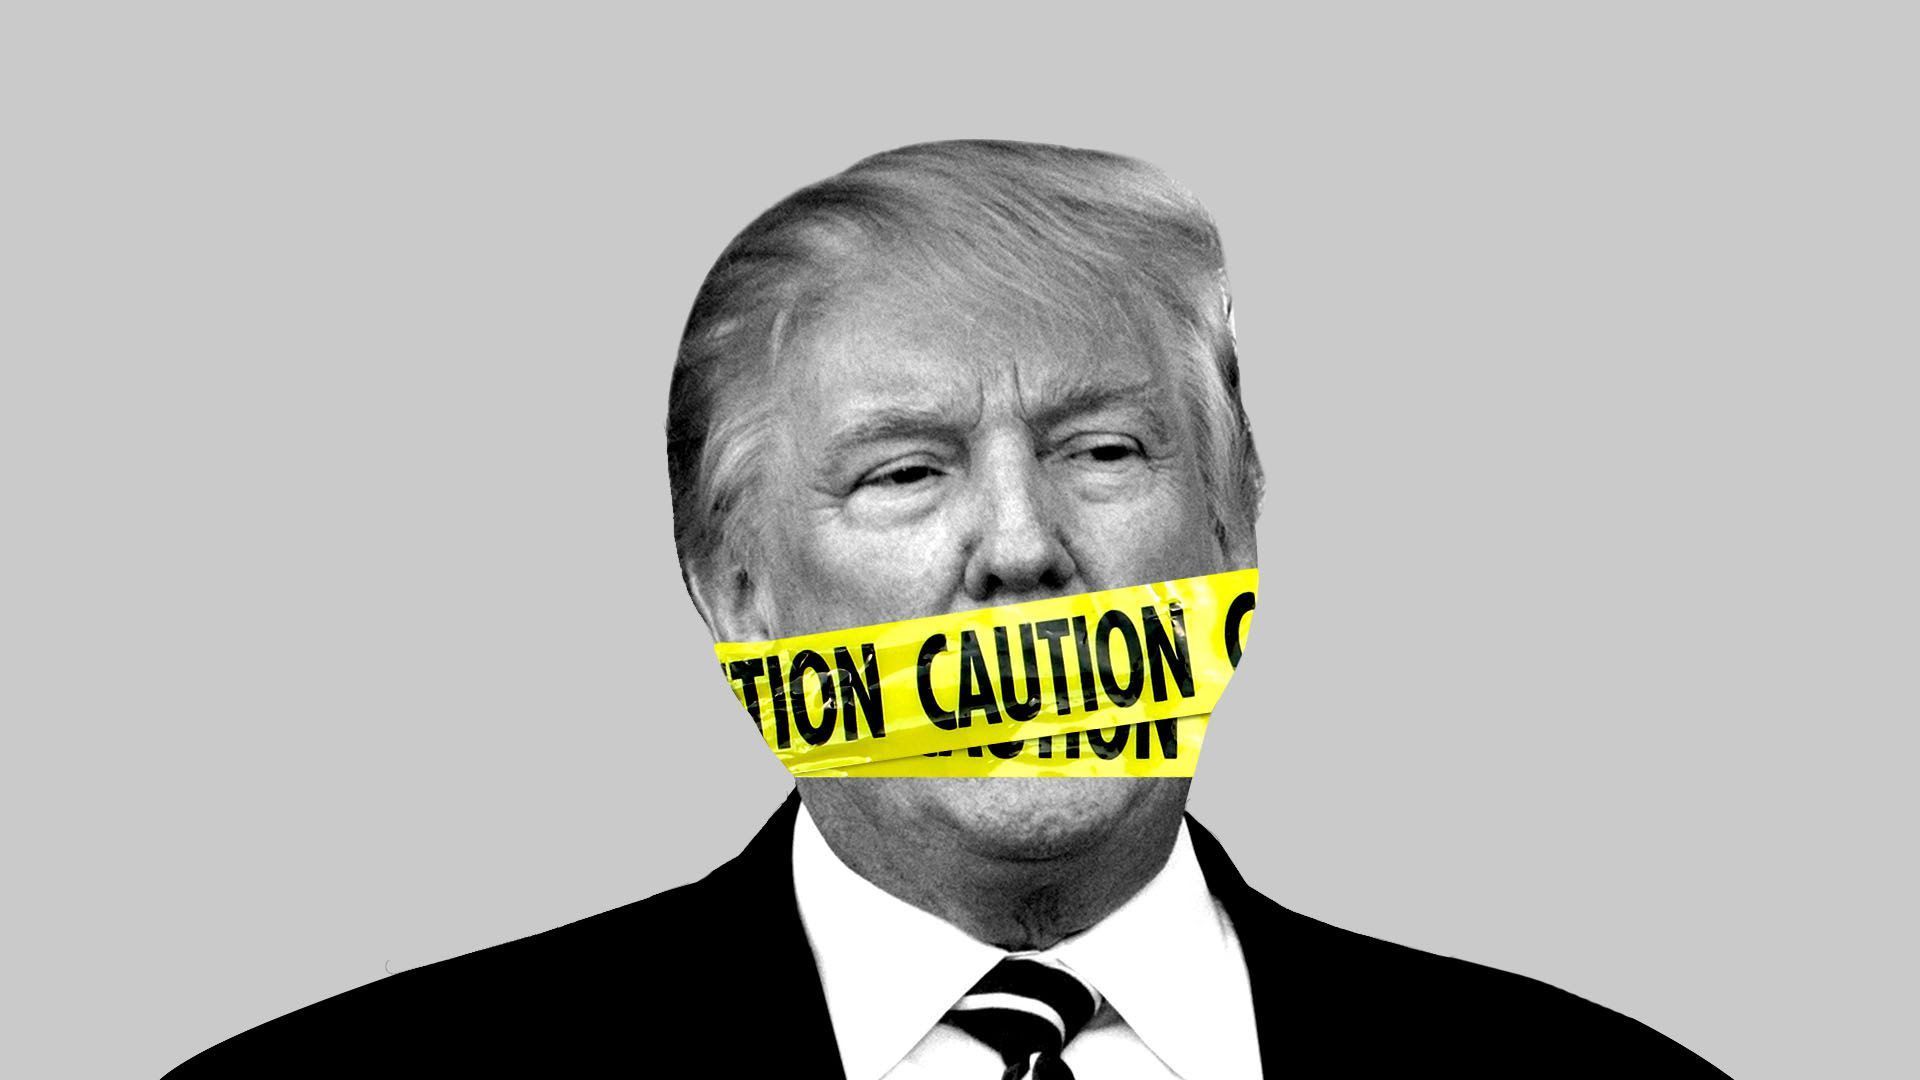 An illustration of caution tape over president Trump's mouth